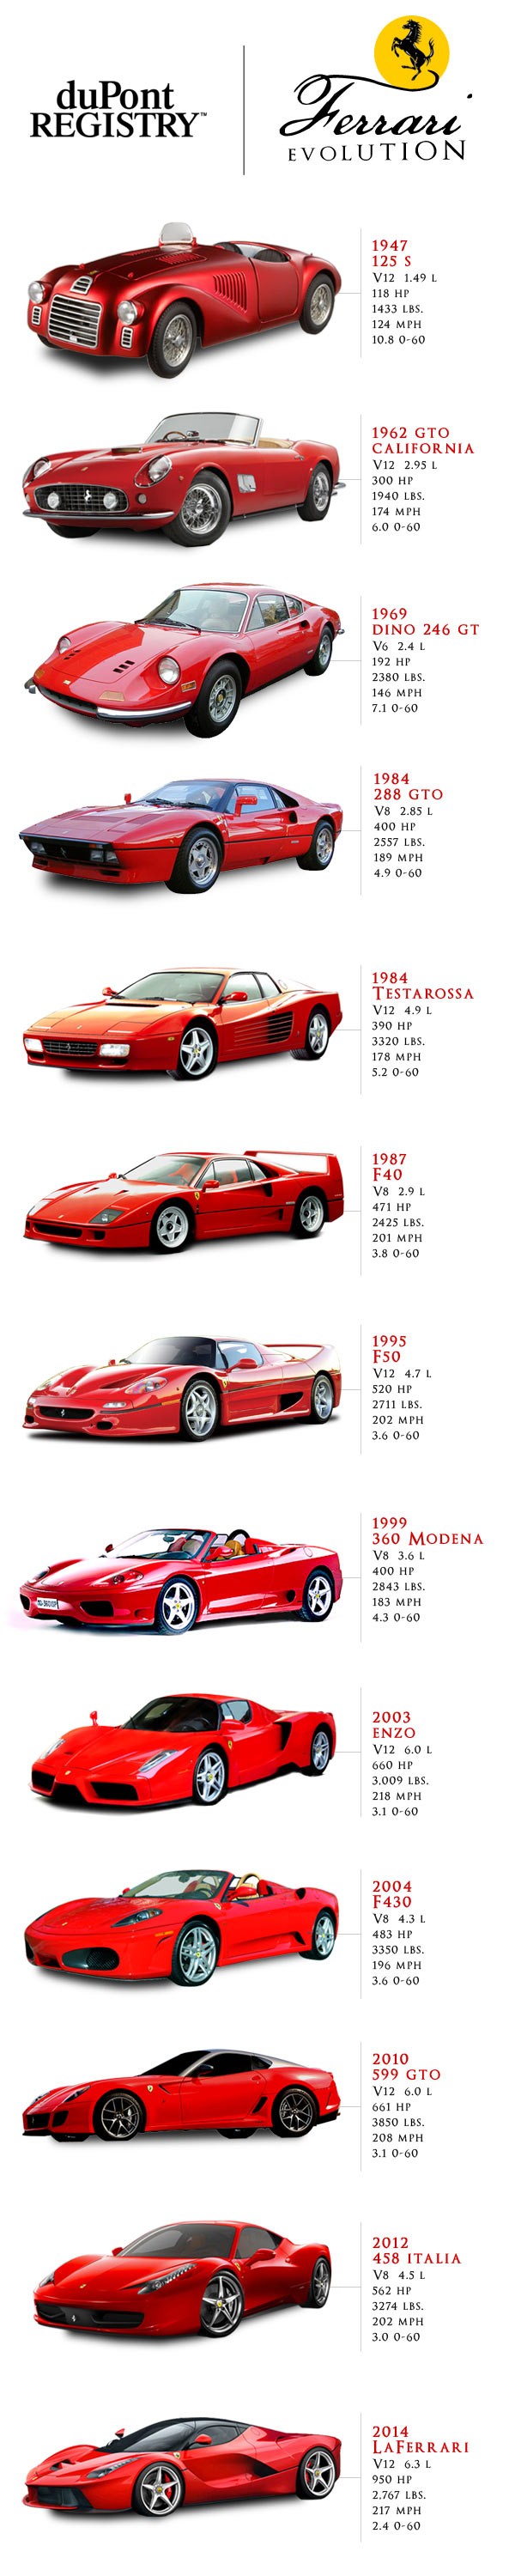 The progression of Ferrari from 1947 to now